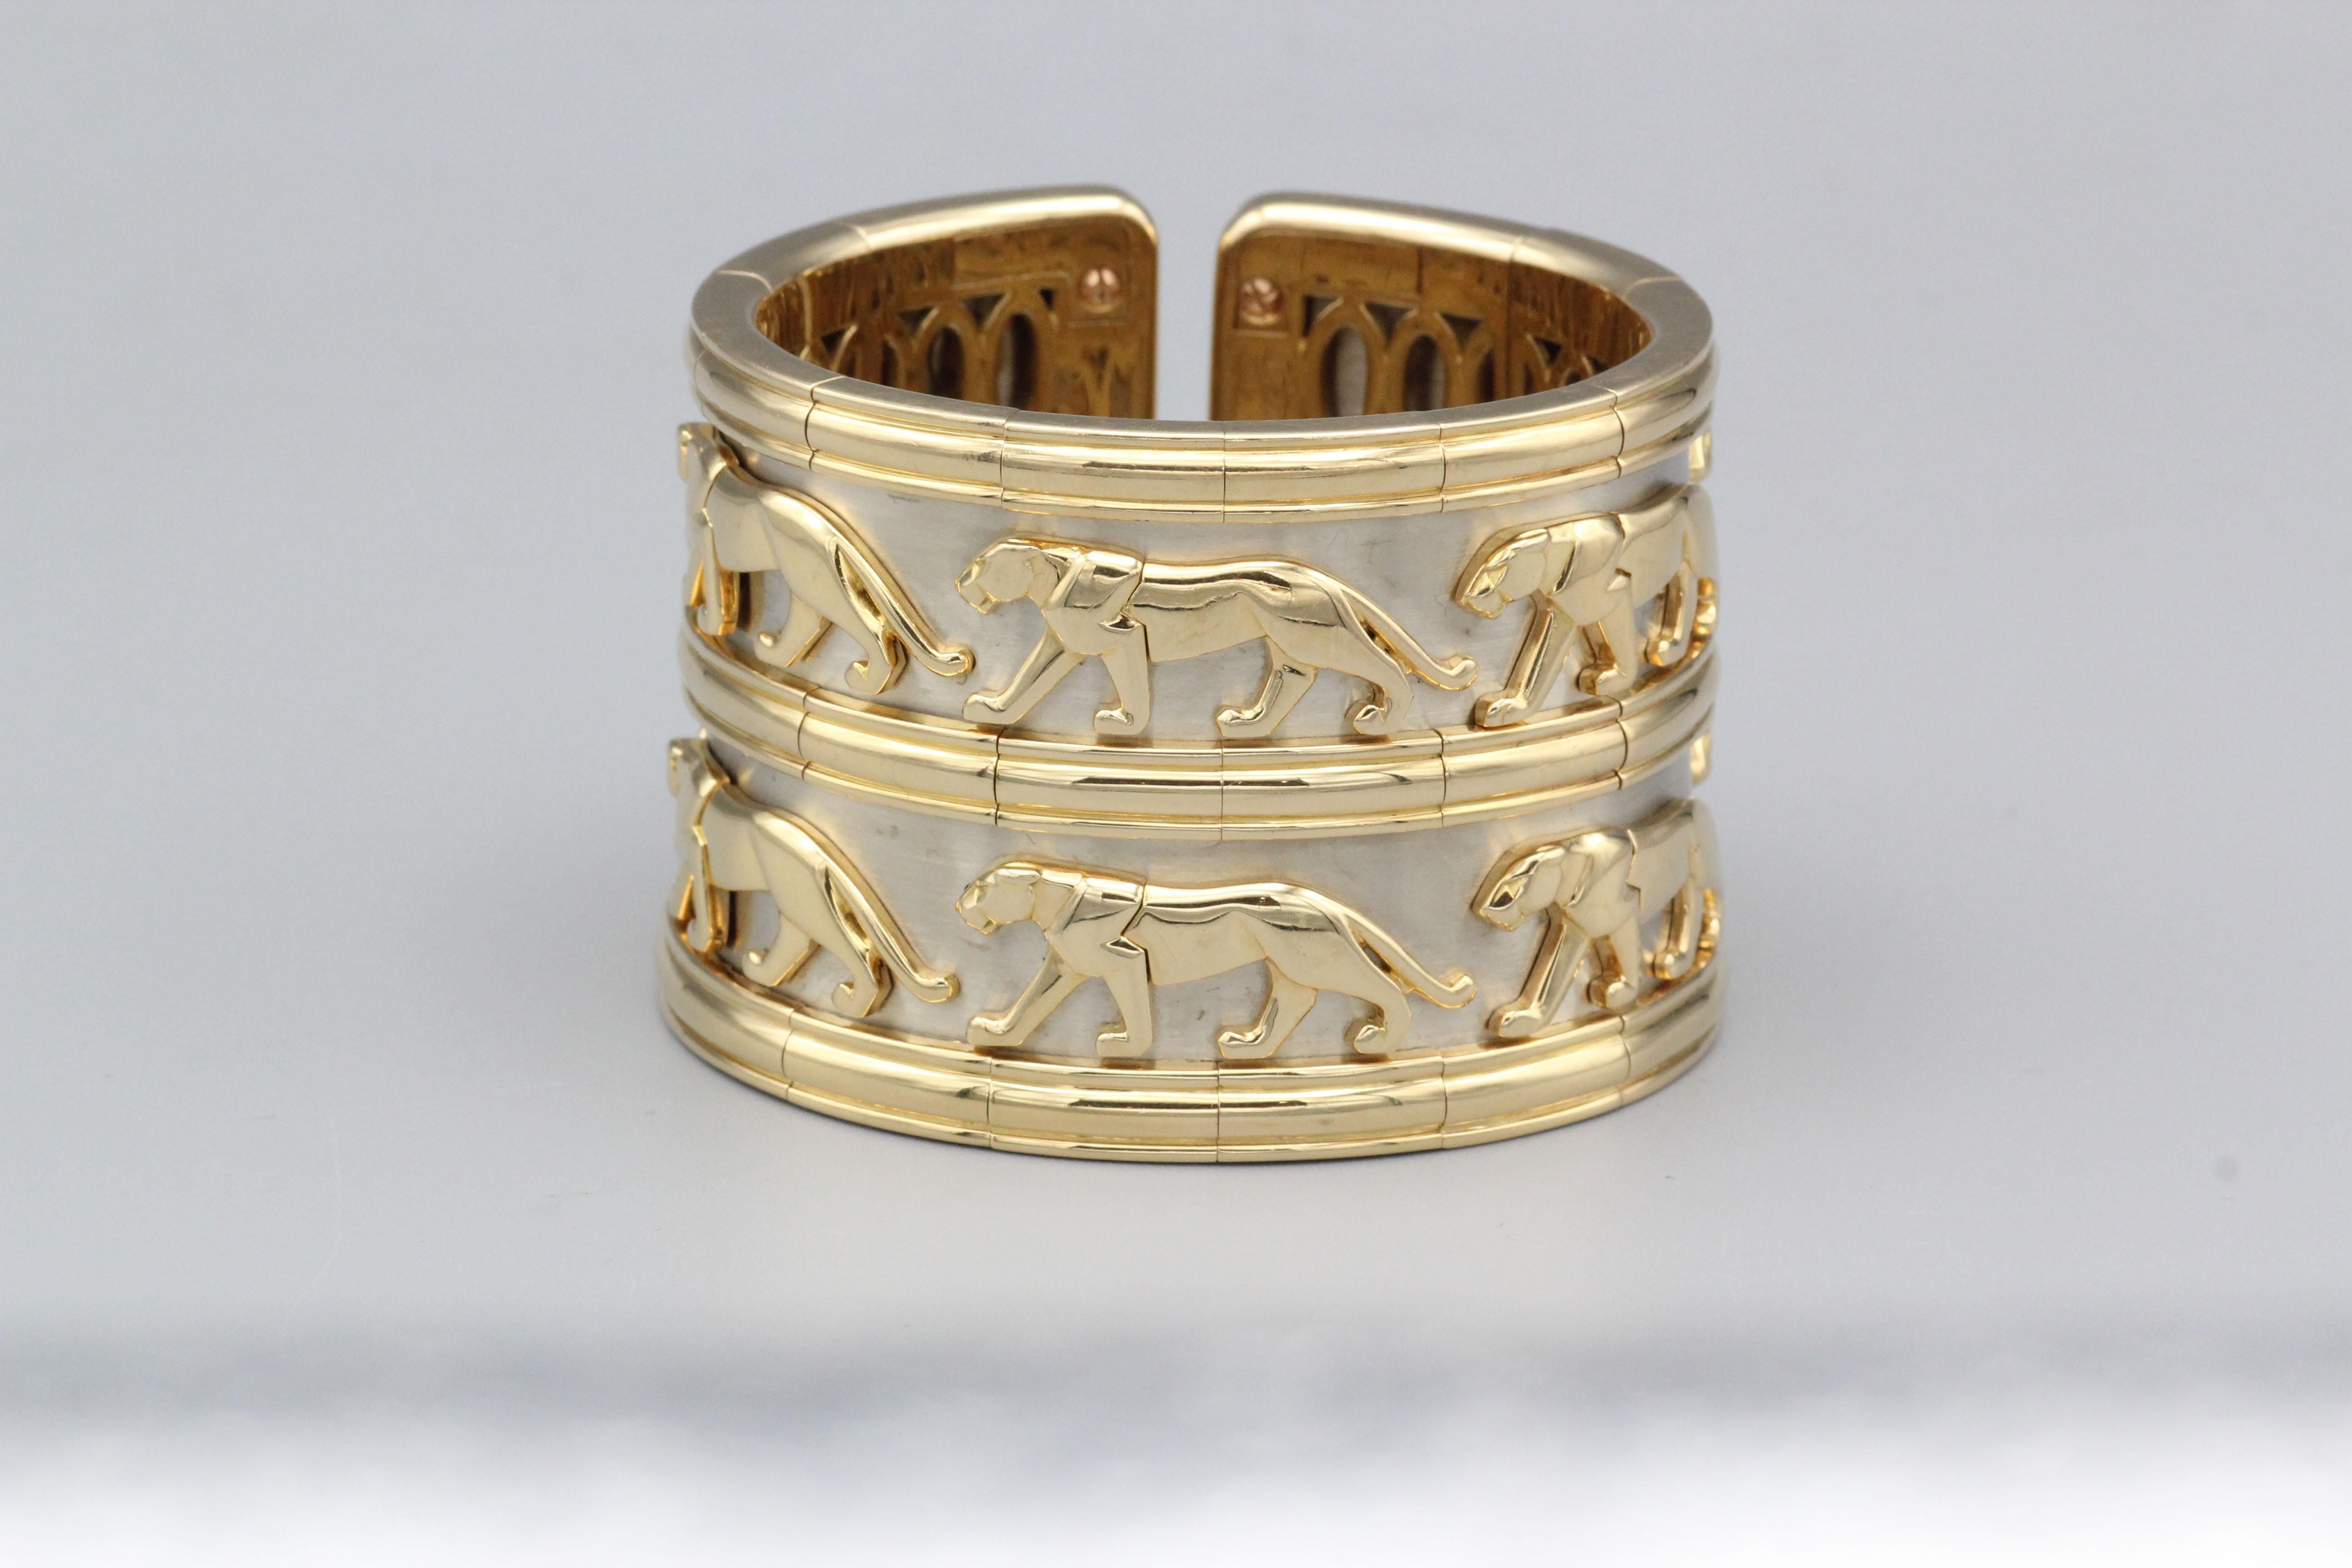 Impressive 18K white and yellow gold cuff bracelet from the 